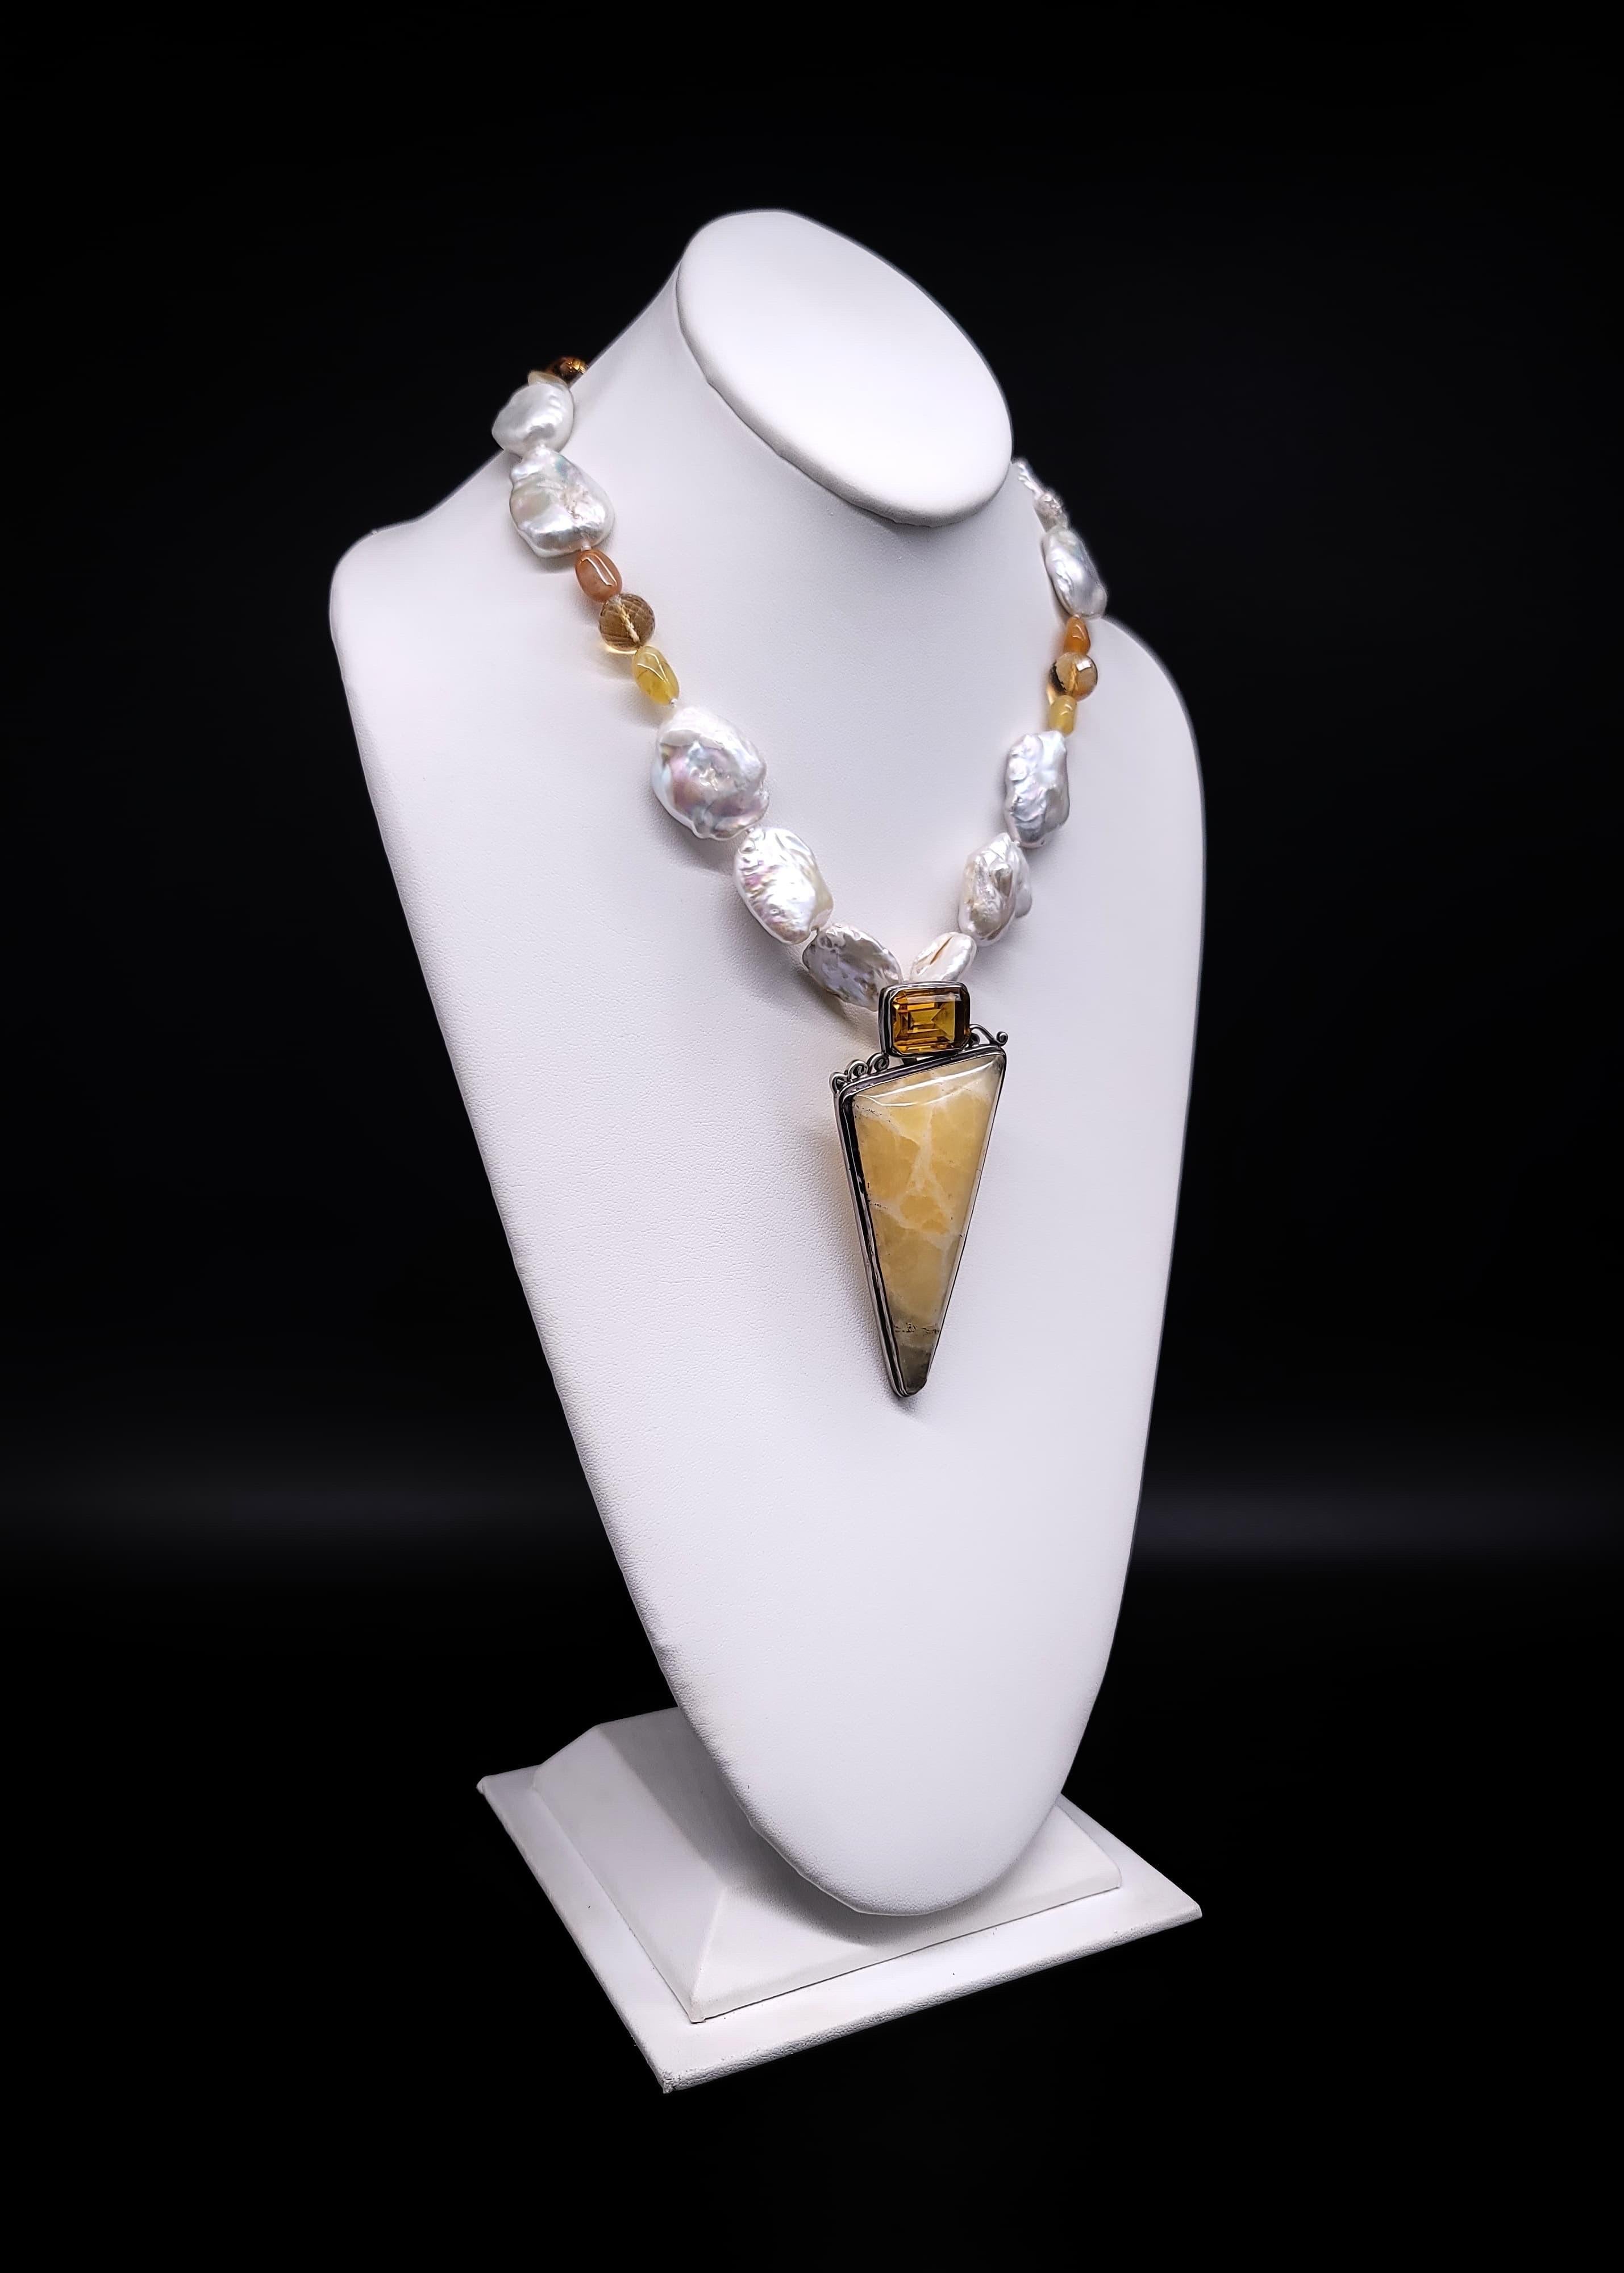 Captivate Hearts with Our Exquisite Stone Pendant Necklace!

Baroque Pearls and faceted Citrine gems intertwine in flawless harmony, complemented by delicate polished Yellow Onyx accents that exude both warmth and sophistication. In the spotlight is